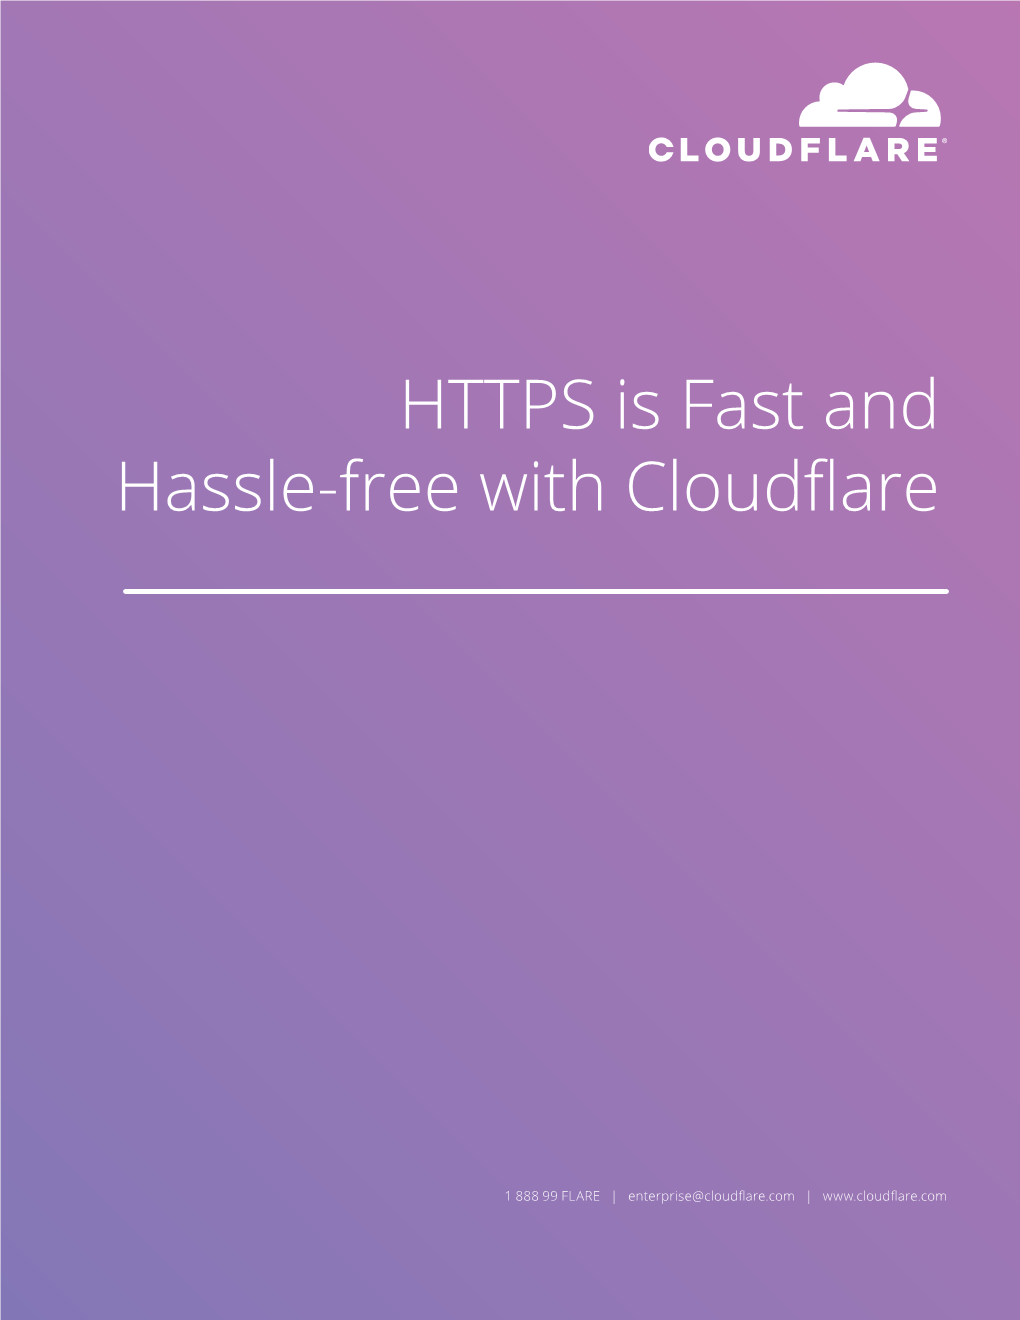 HTTPS Is Fast and Hassle-Free with Cloudflare